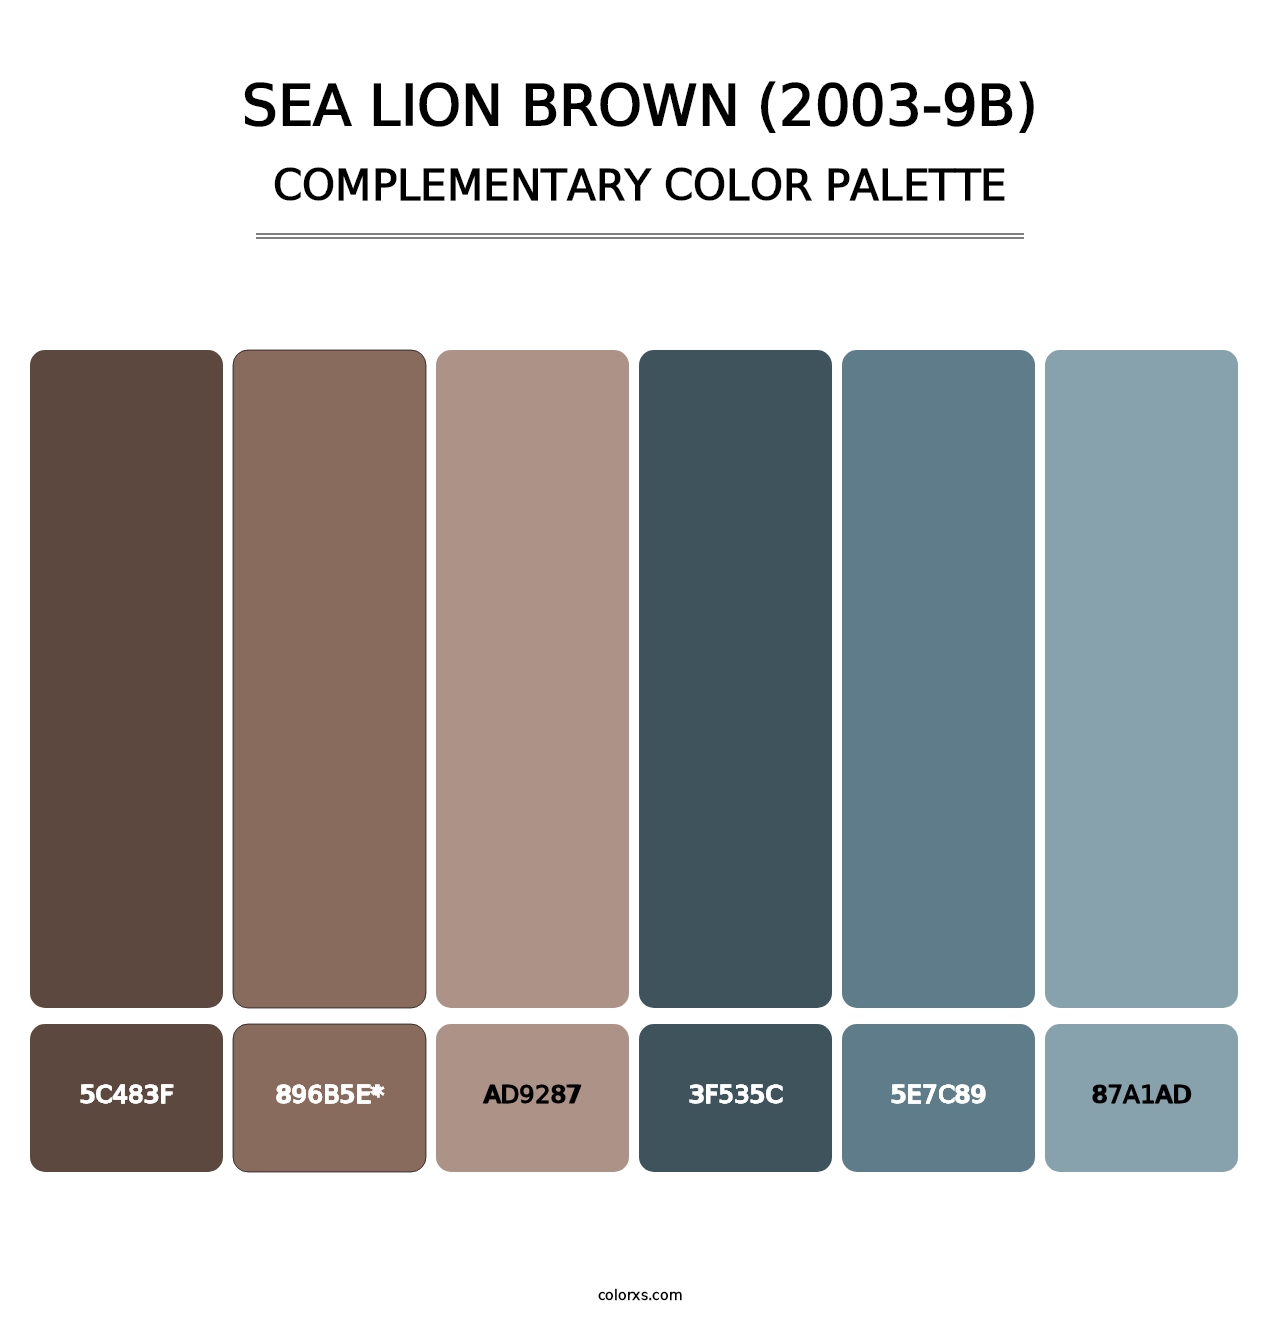 Sea Lion Brown (2003-9B) - Complementary Color Palette